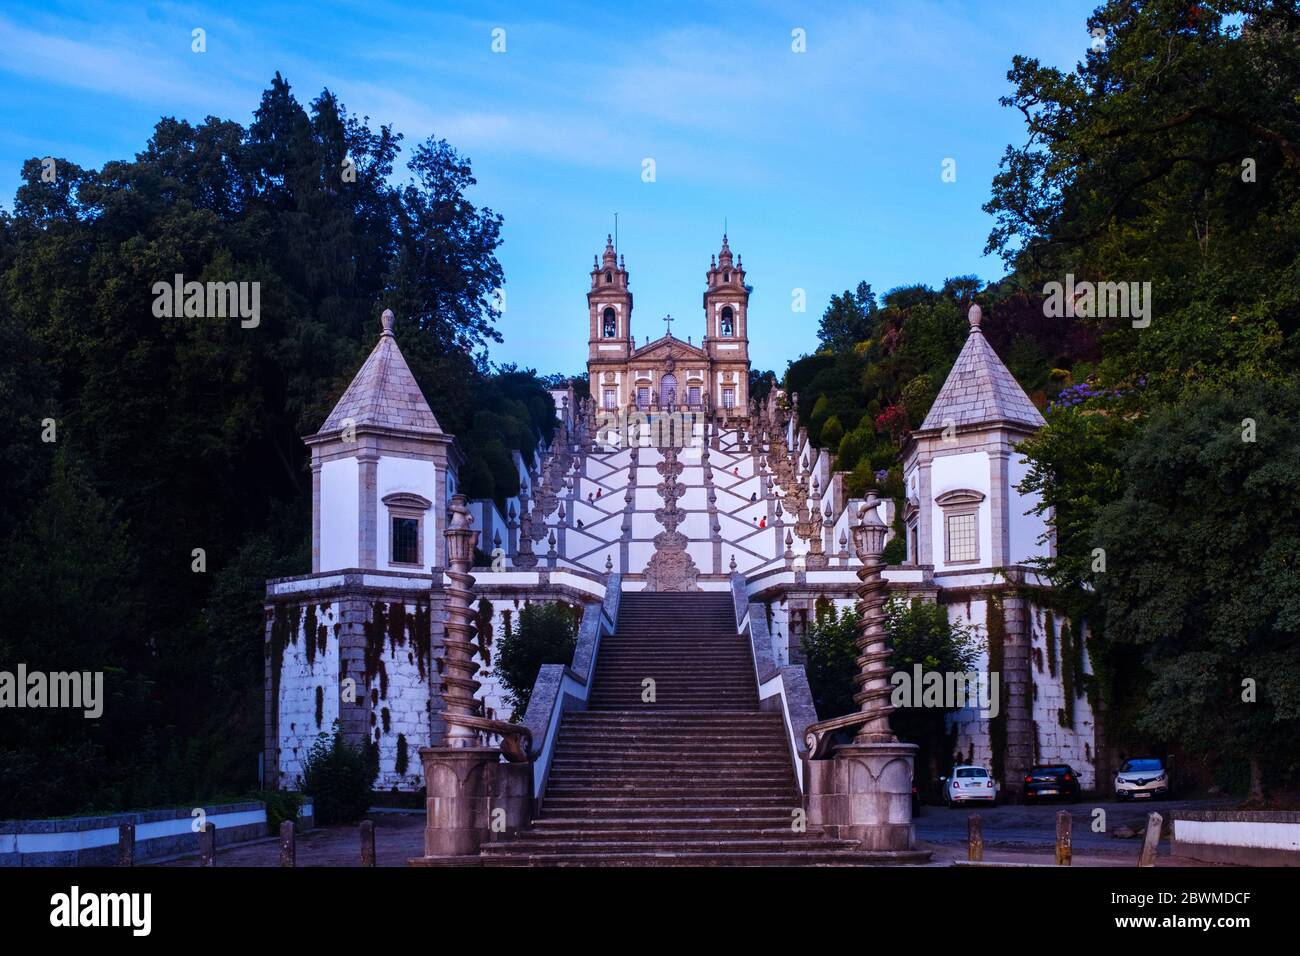 Braga, Portugal. Stairs to the Bom Jesus do Monte Cathedral in Braga, Portugal during the evening Stock Photo